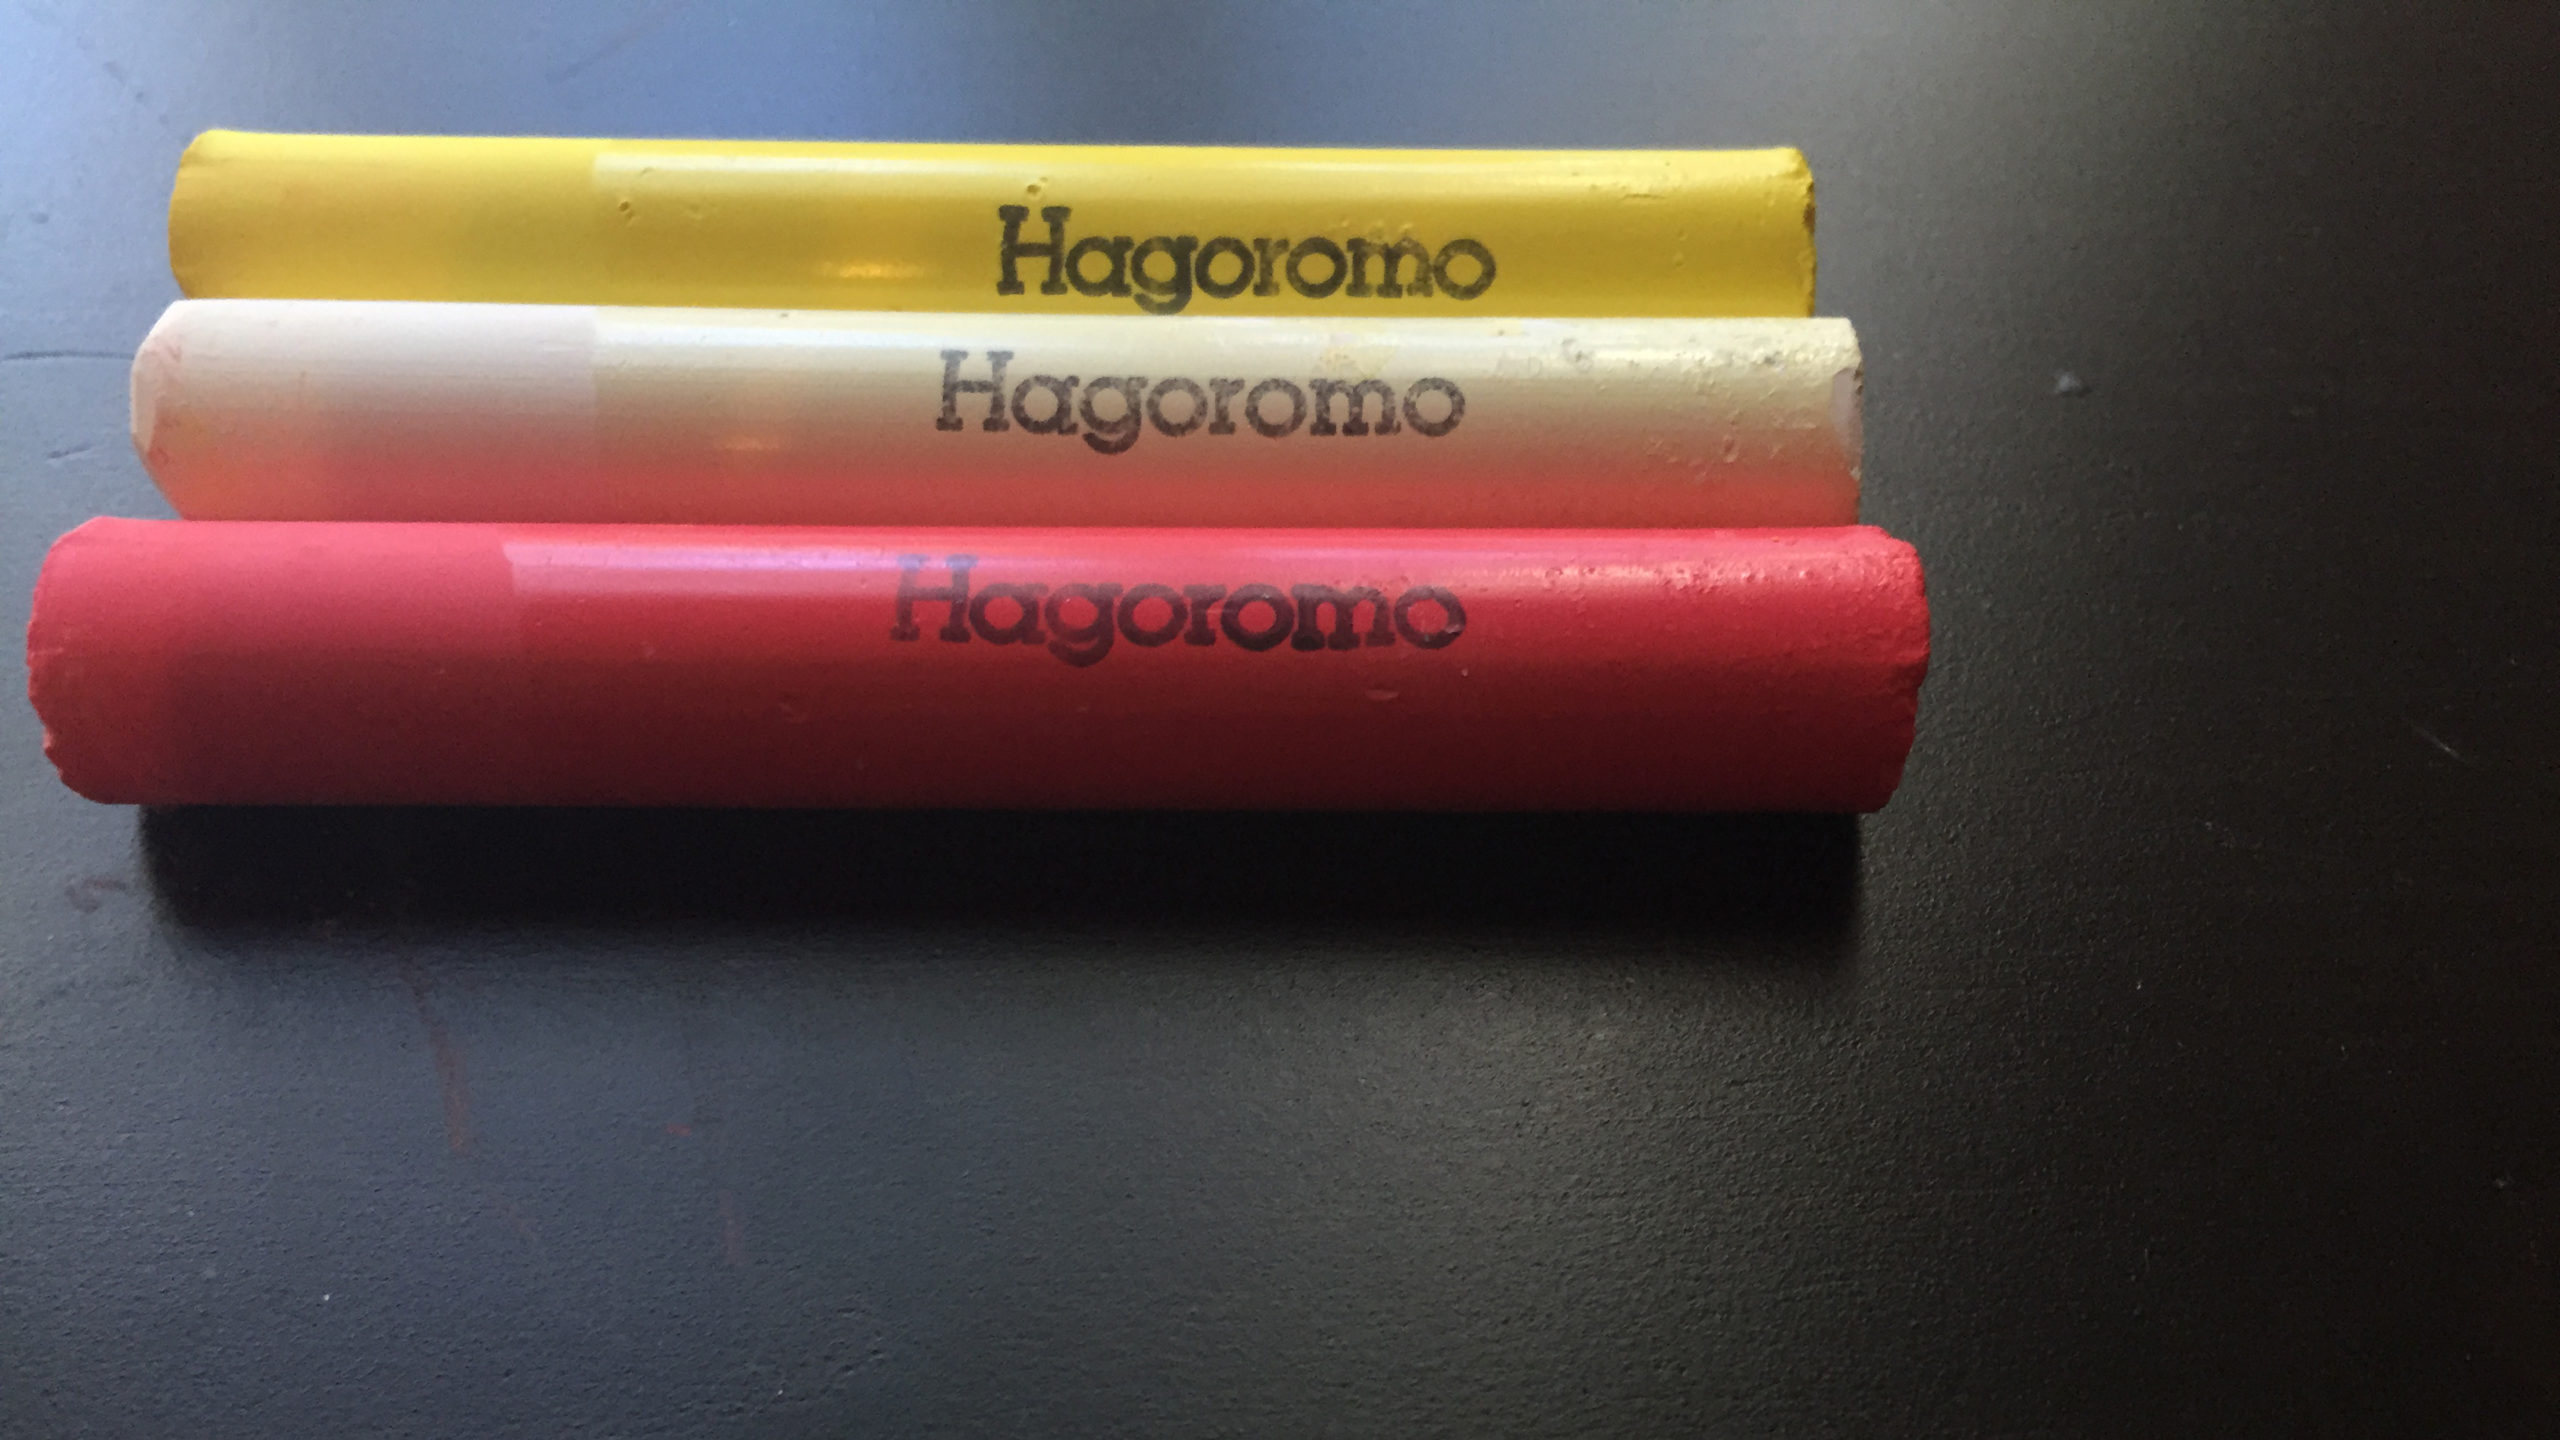 Hagoromo chalk: Why the demise of a Japanese company is a blow to